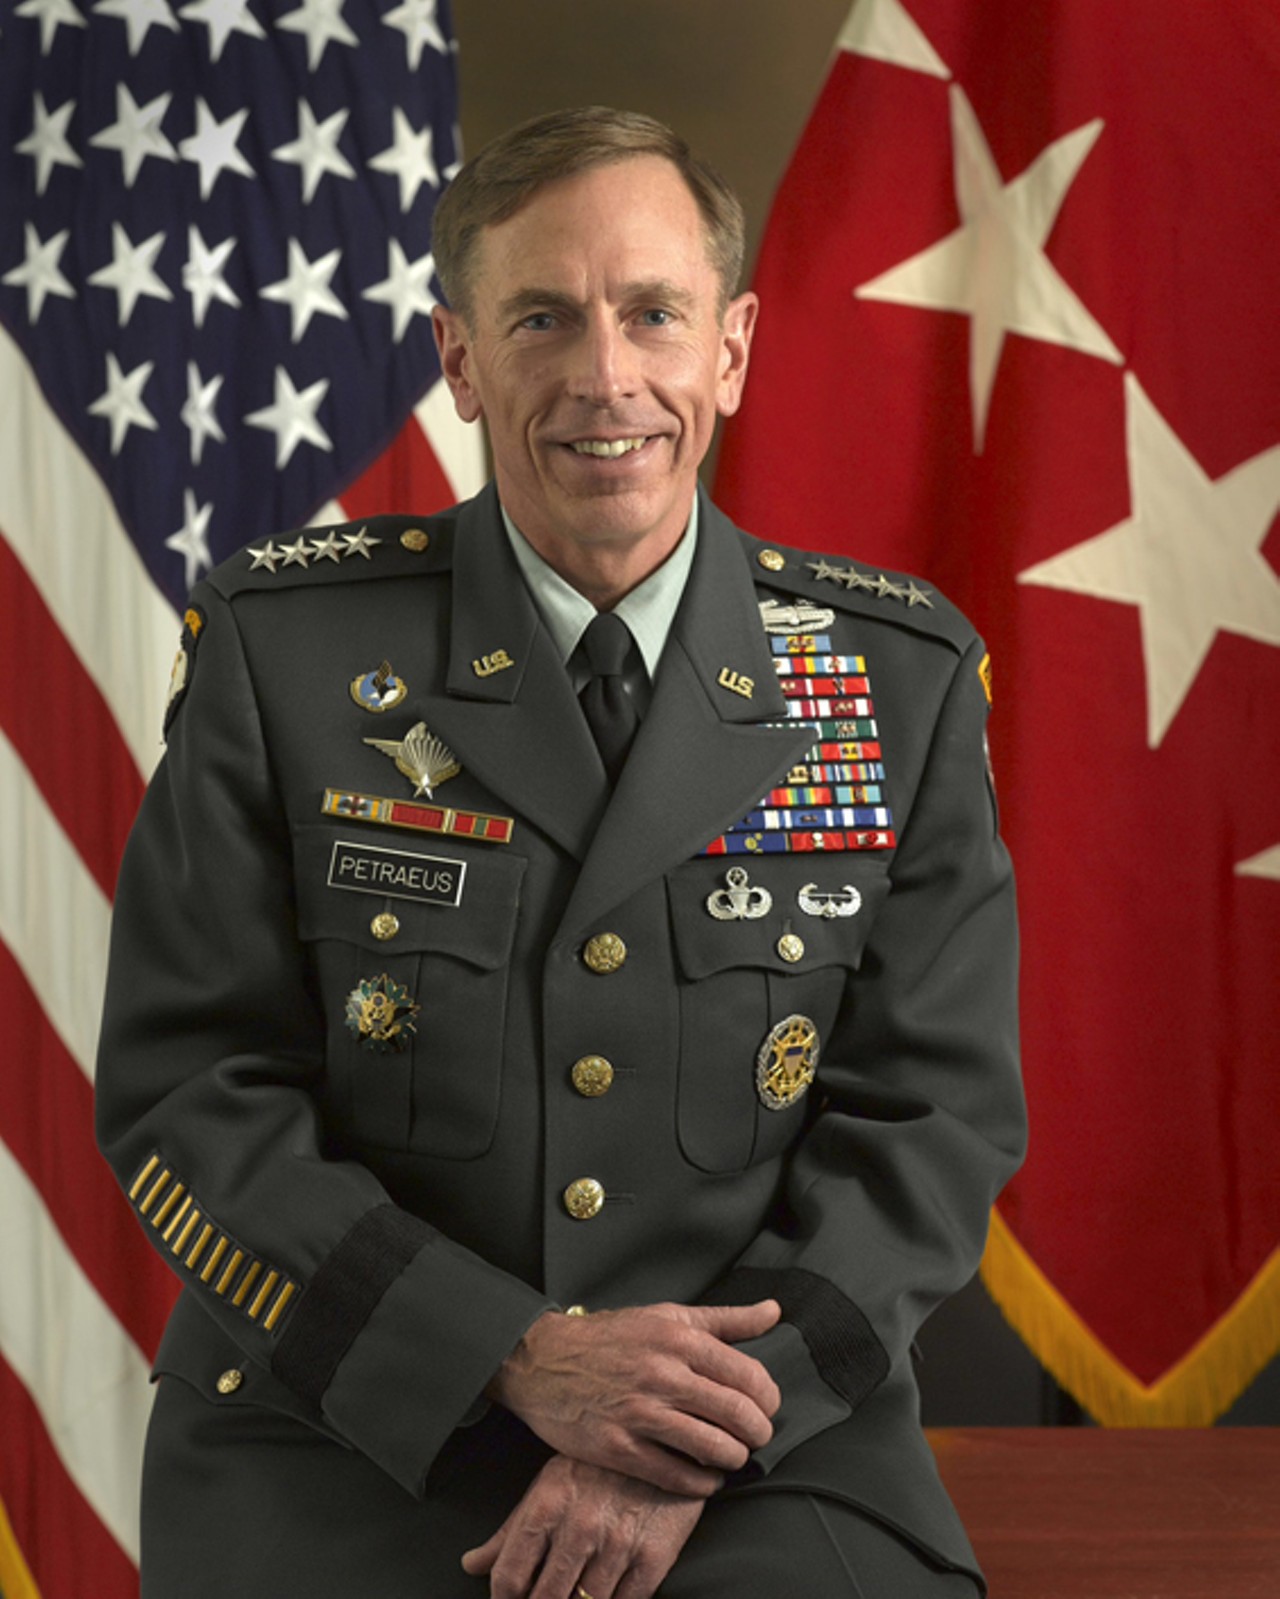 David Petraeus
Adored by Republicans, Democrats, and the media--David Patraeus was seemingly beloved by everyone. That turned out to be the problem.